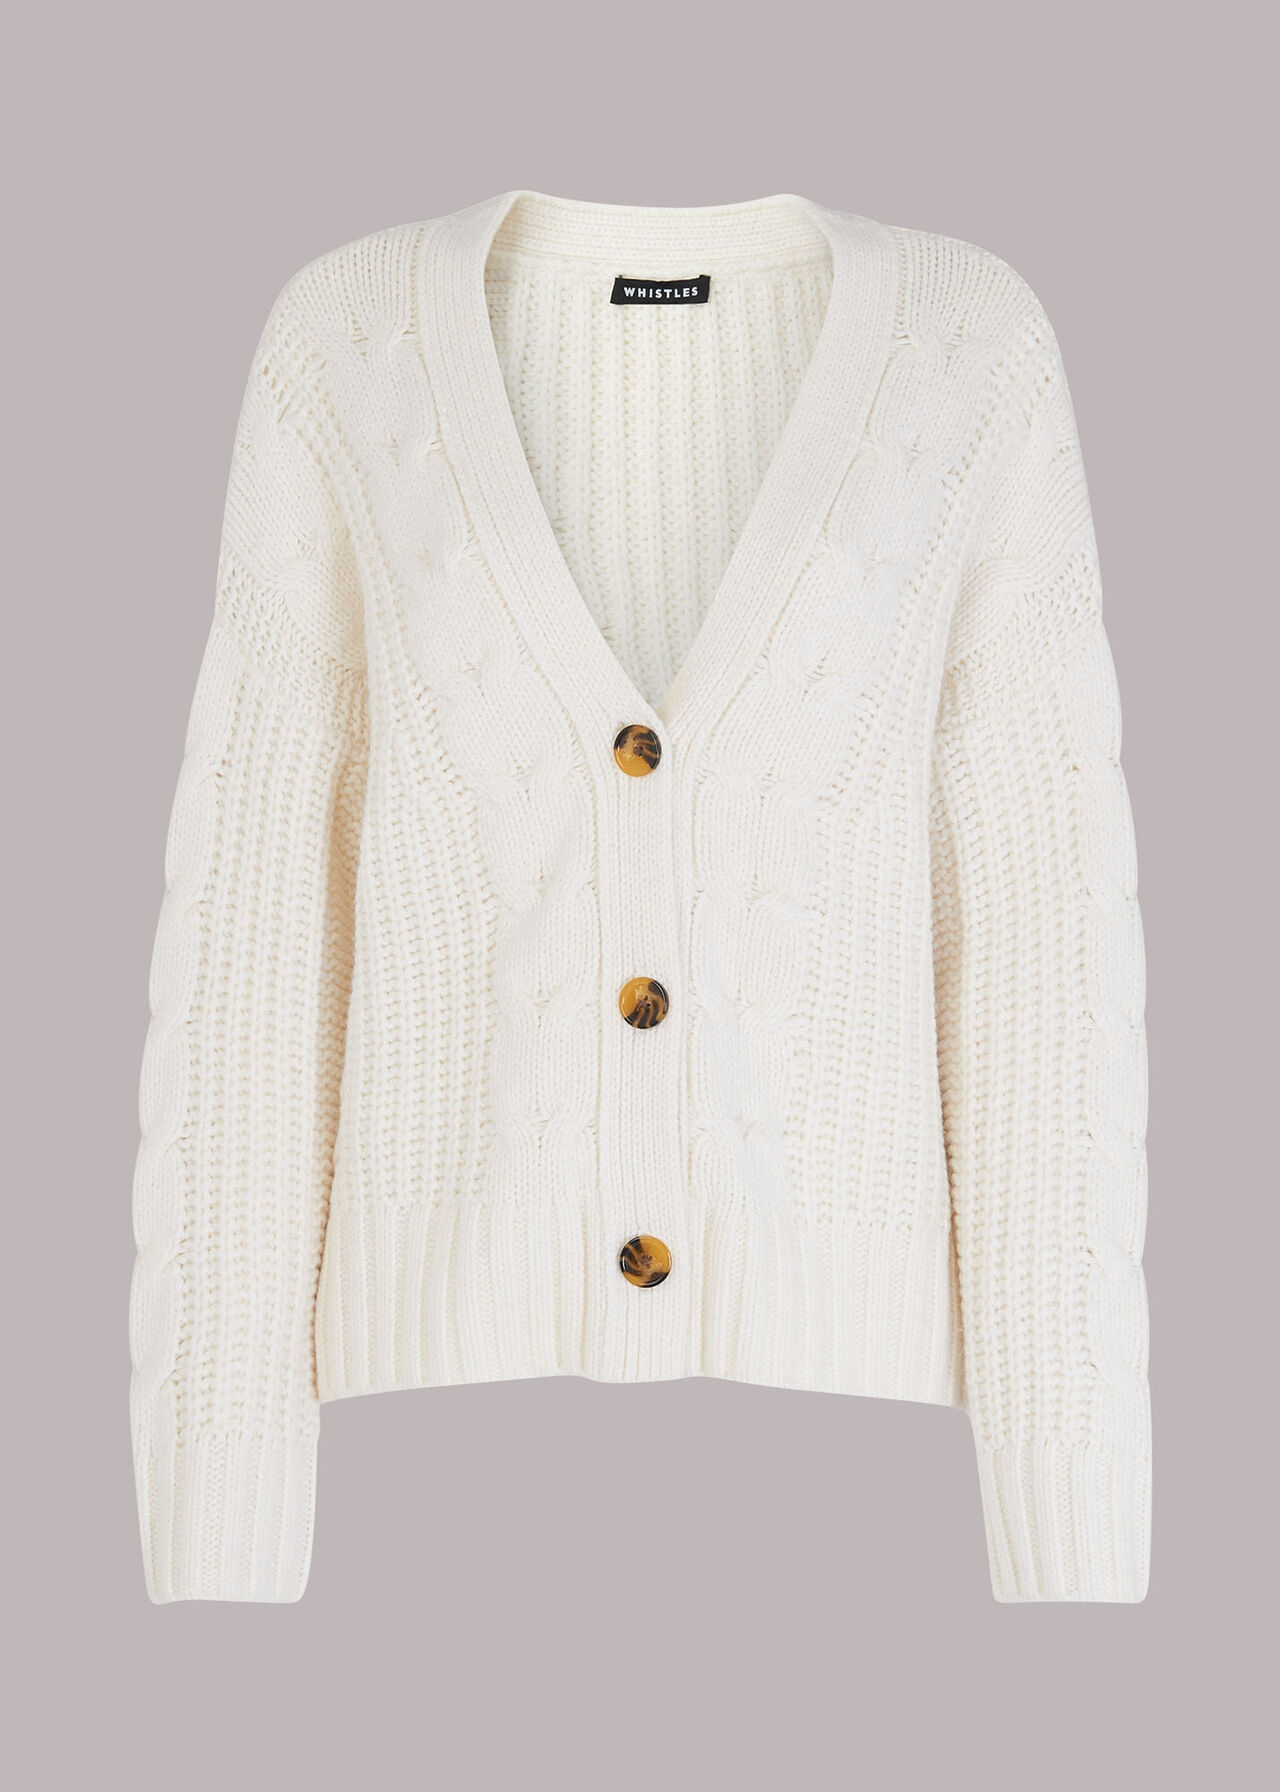 Ivory Cable Knit Cardigan | WHISTLES